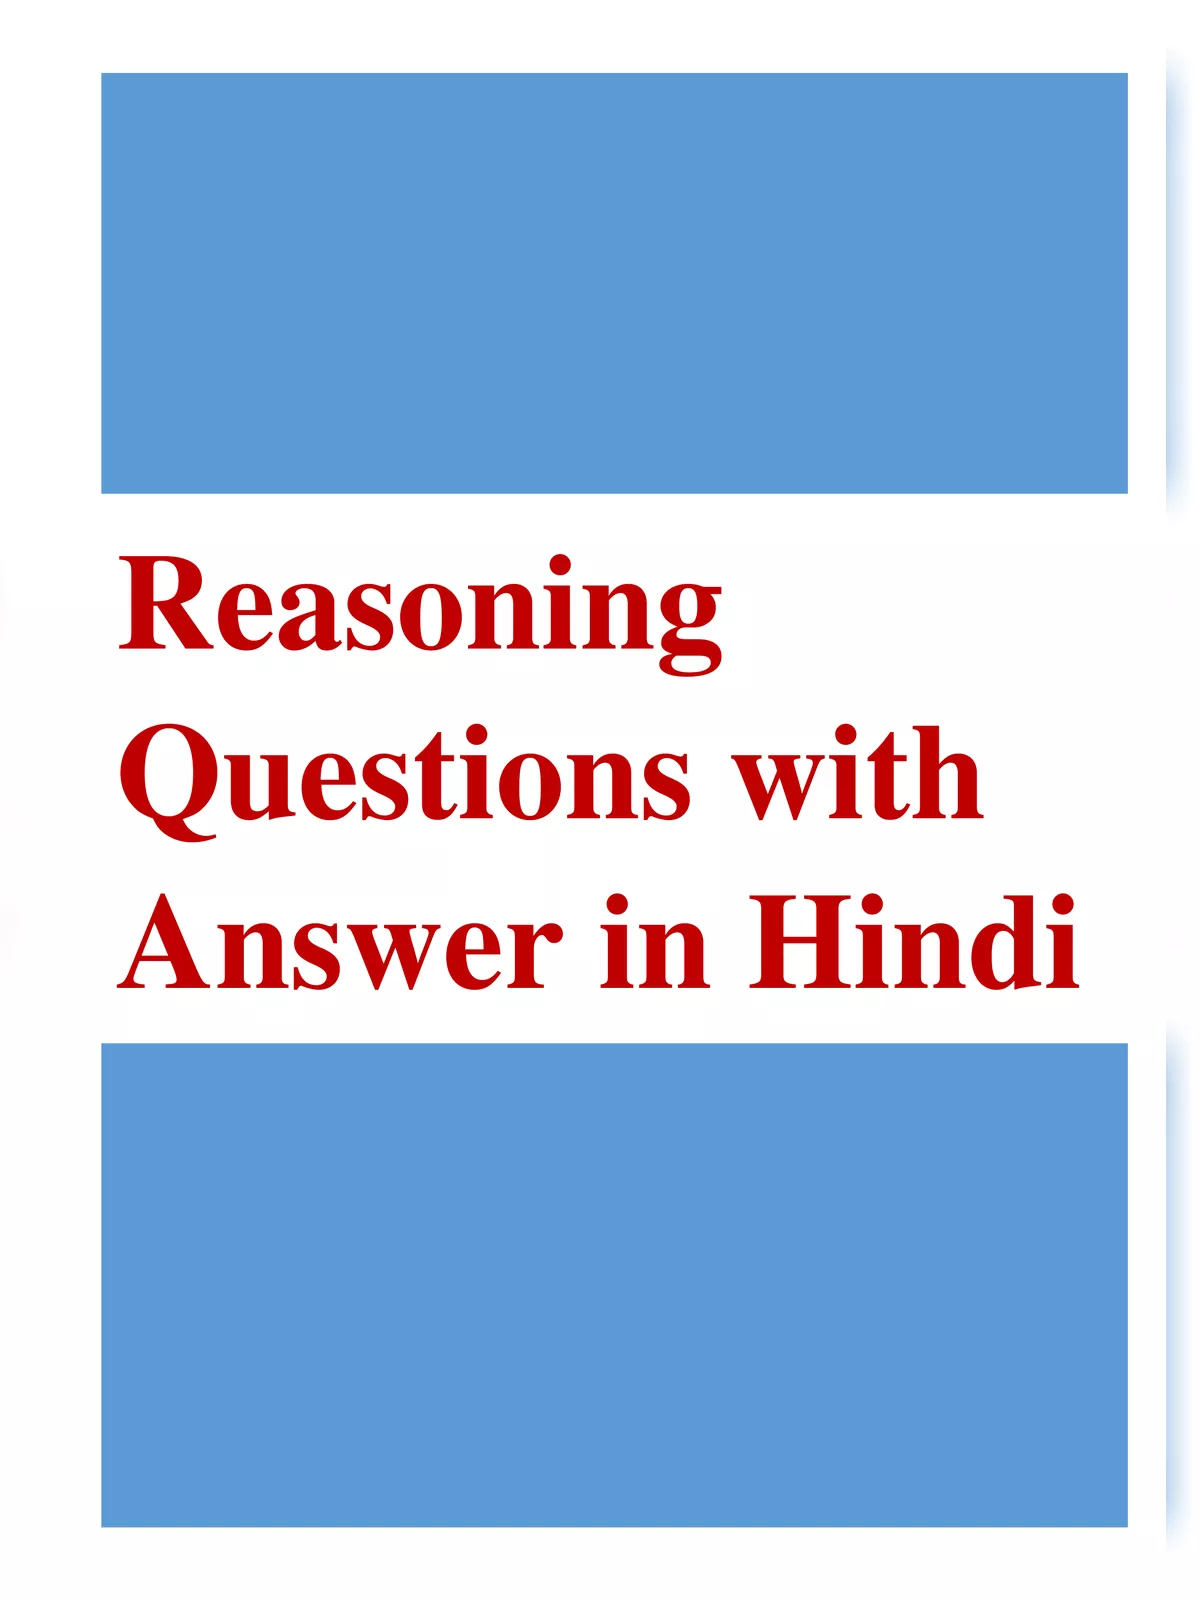 Reasoning Questions with Answer